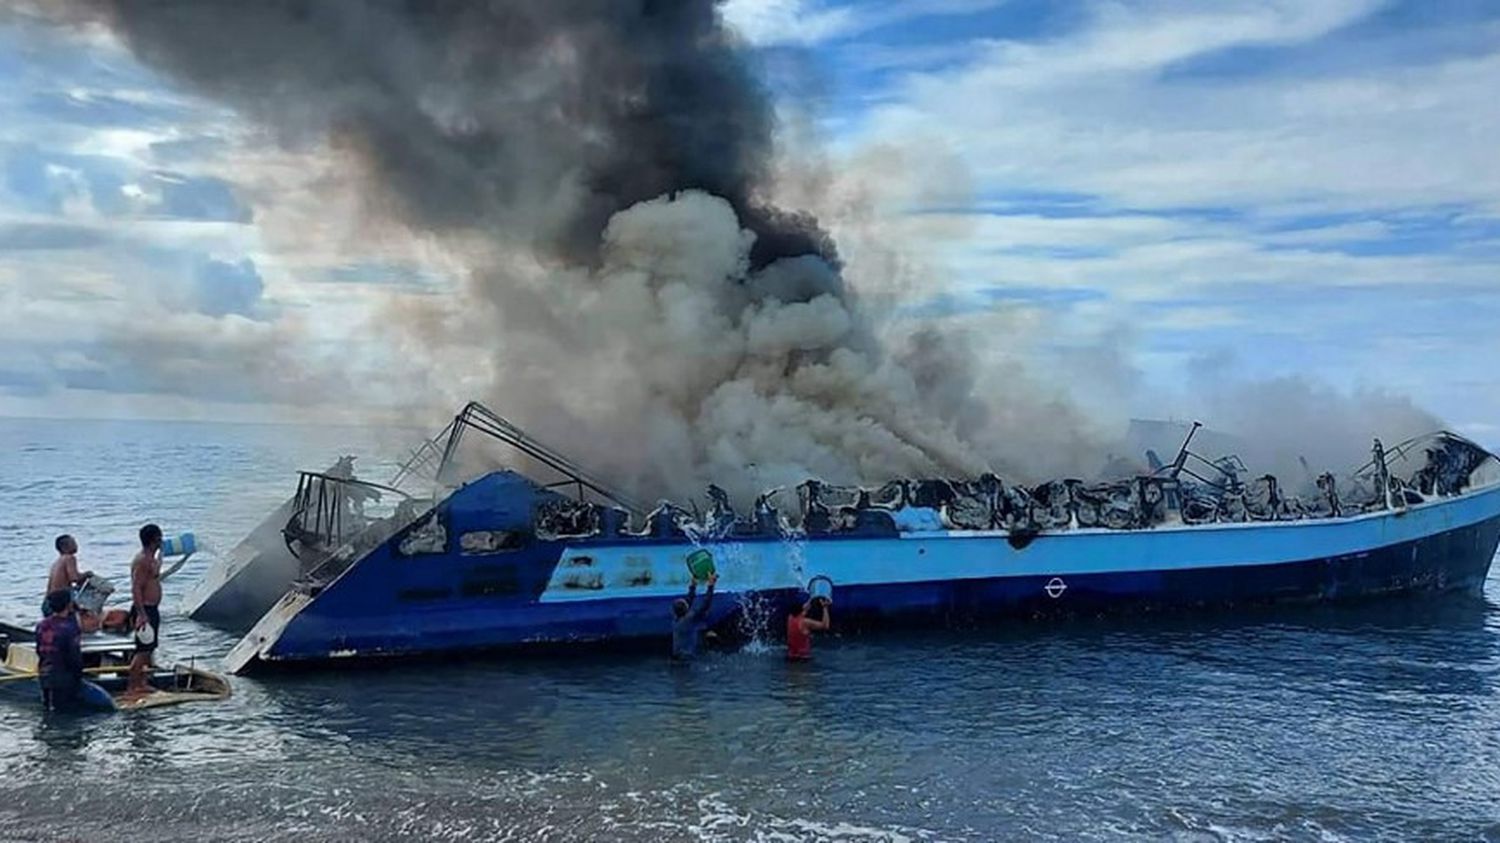 Philippines: At least seven dead in ferry fire
